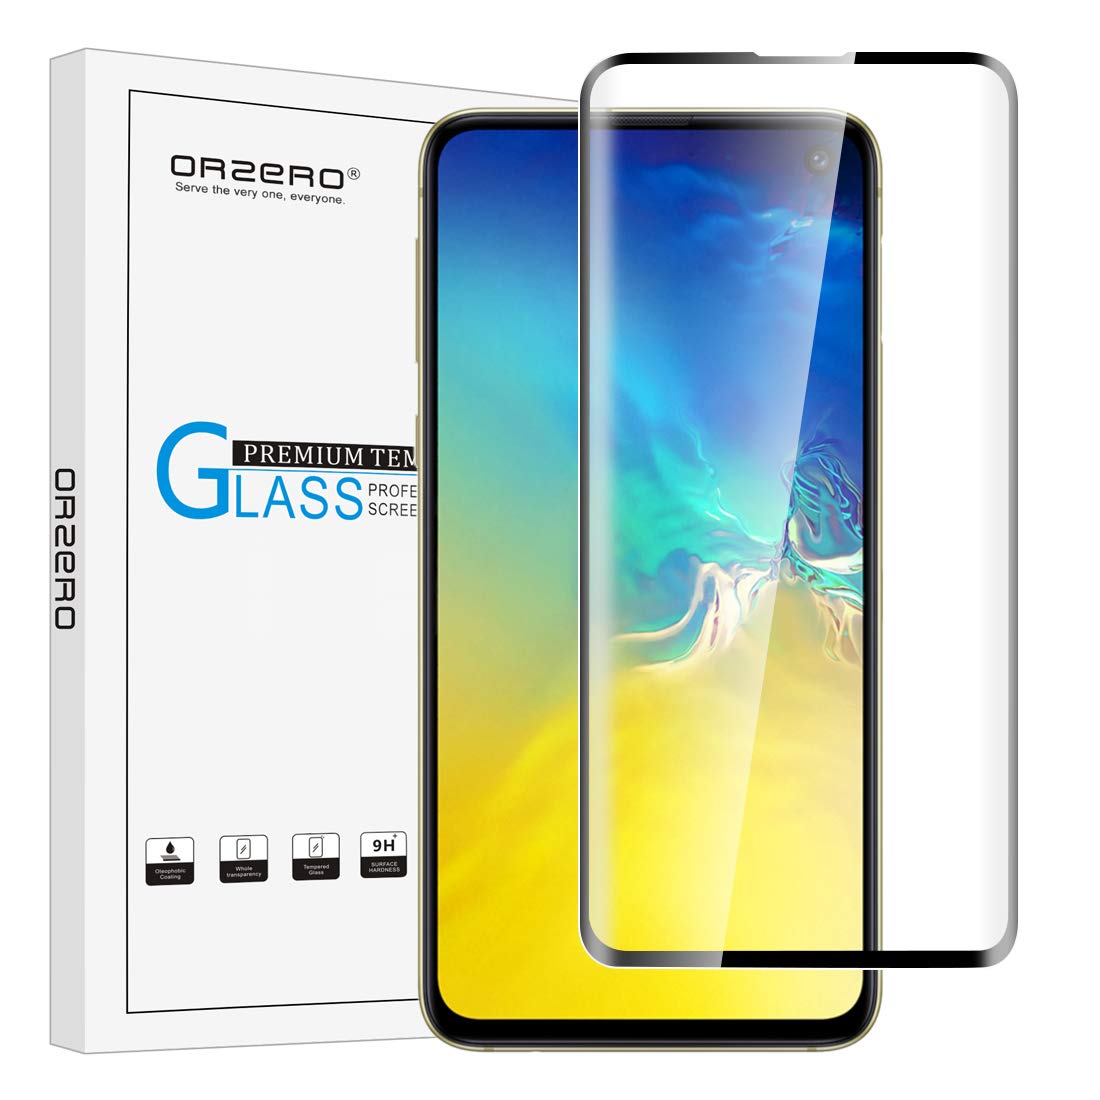 Tempered Glass Screen Protector for Samsung Galaxy S10e by Orzero